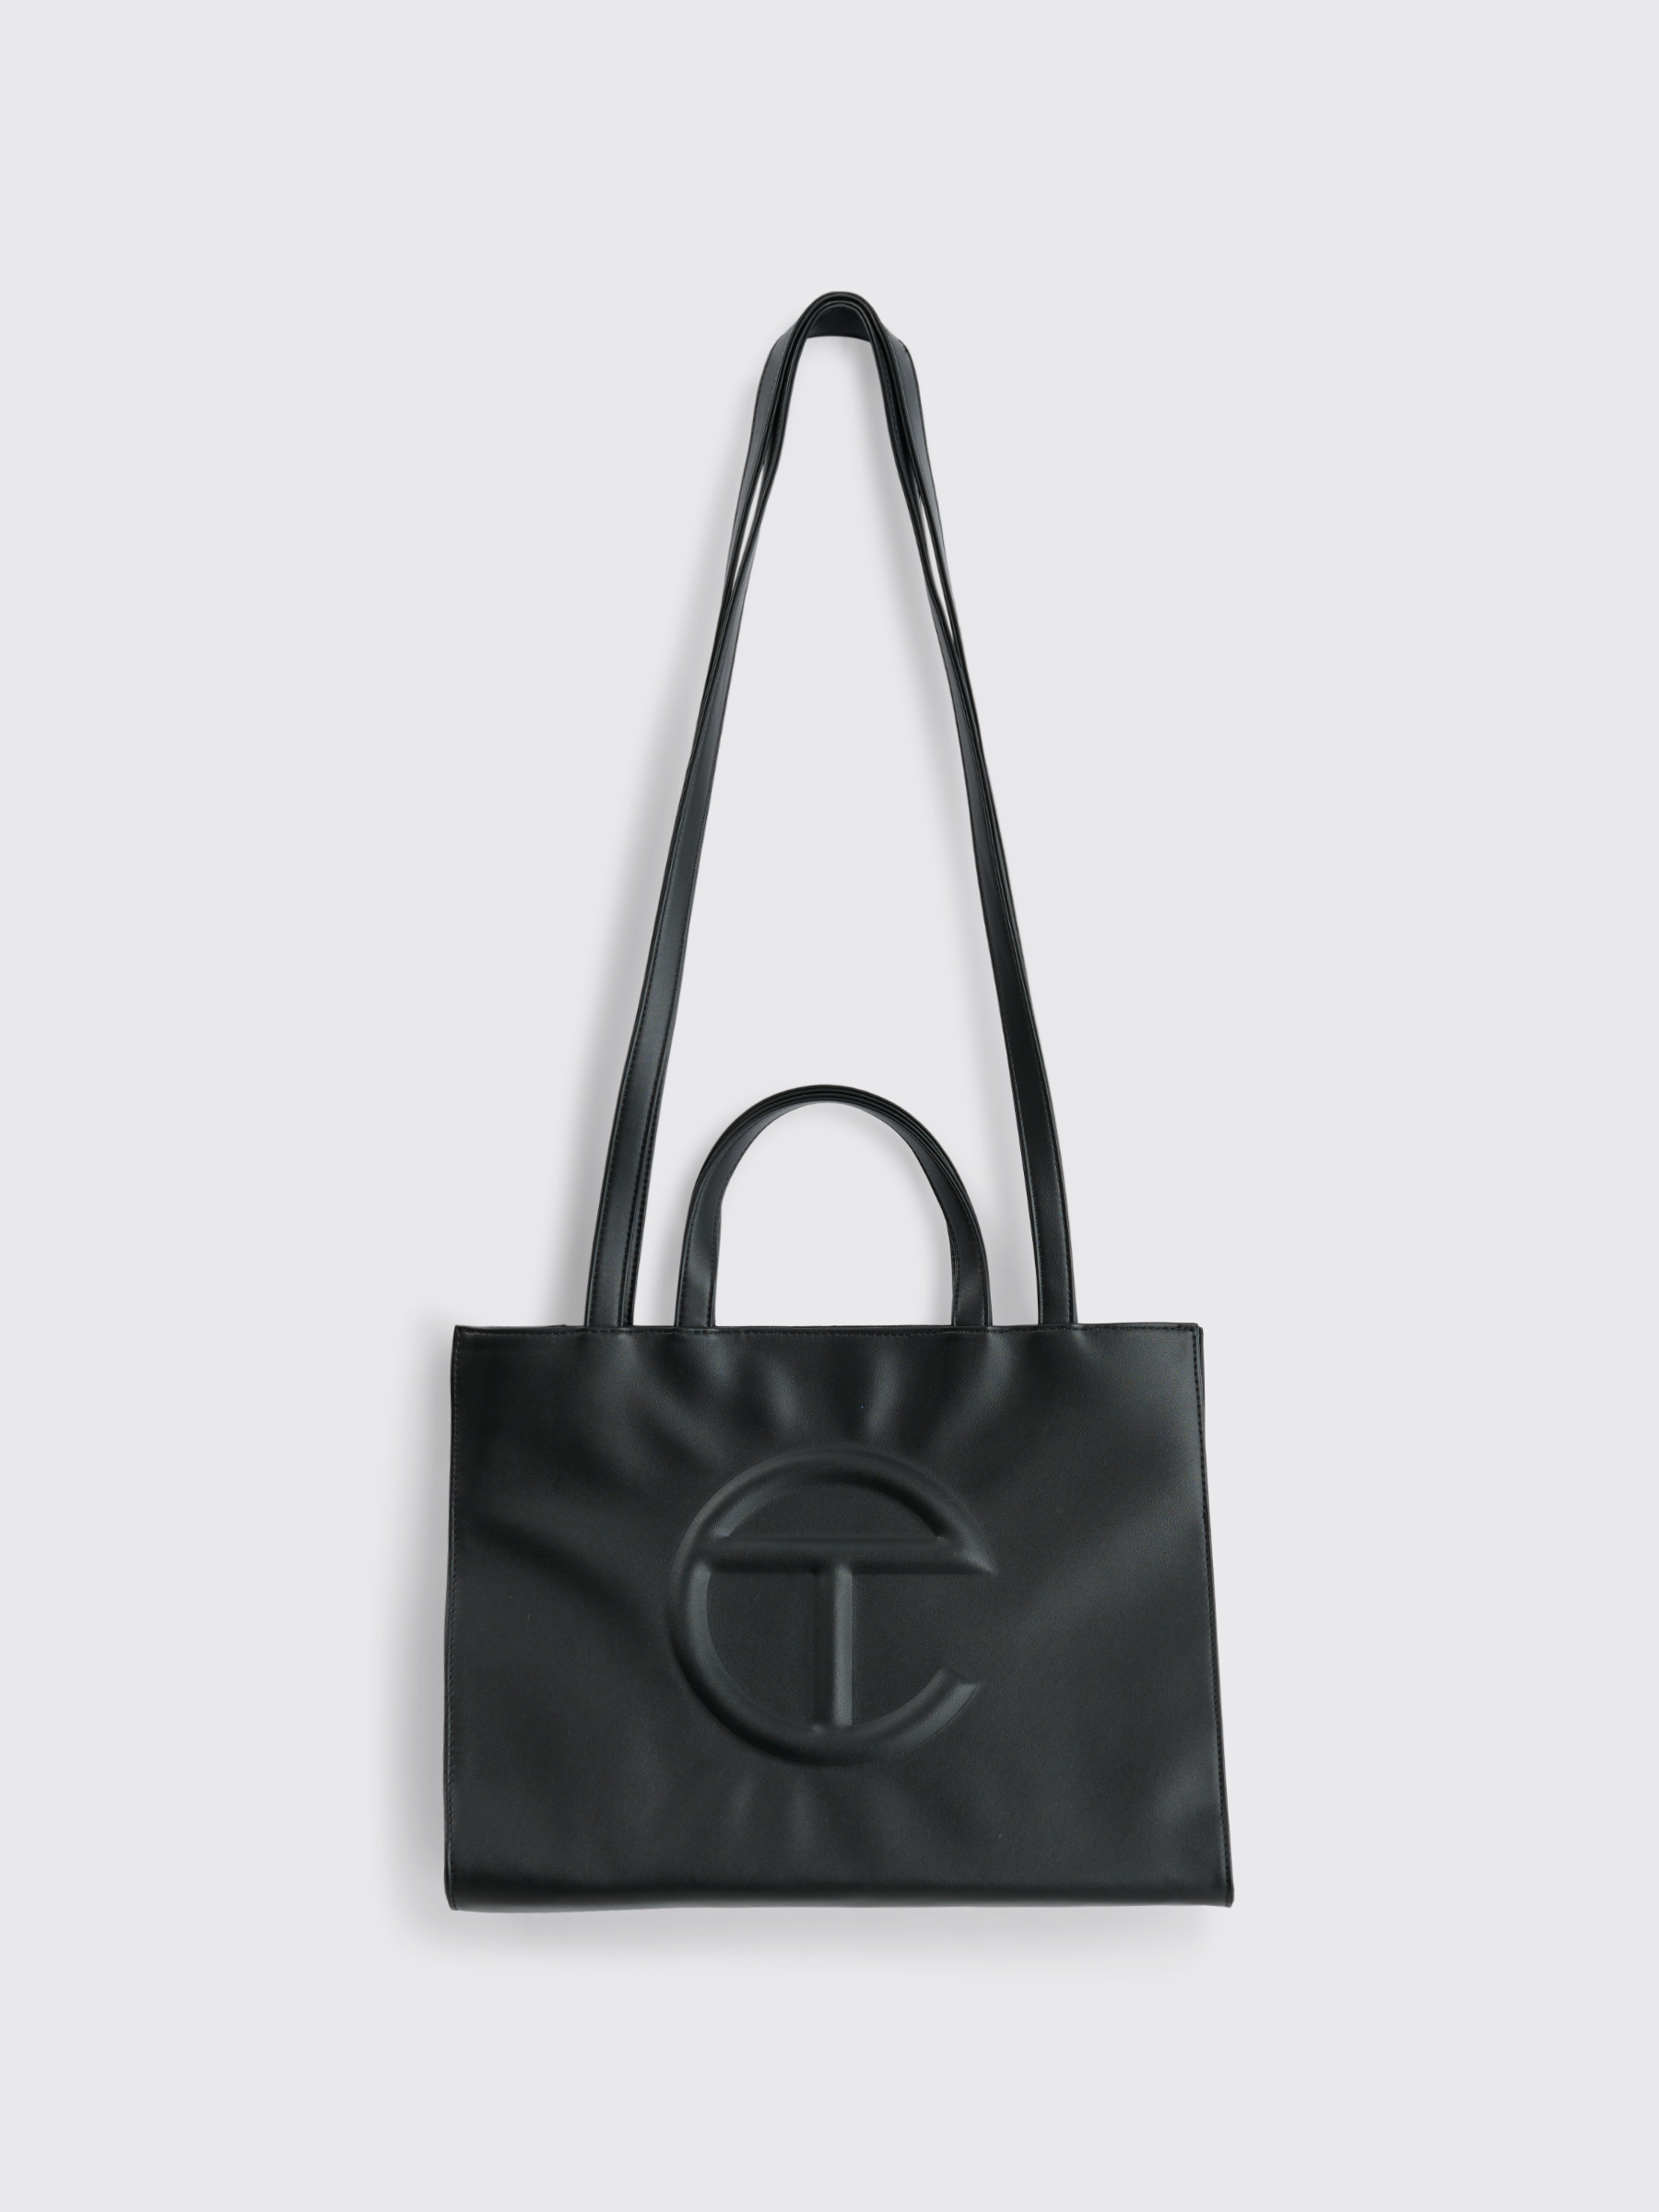 You won't Believe This.. 17+ Facts About Telfar Bag Small: The bag ...